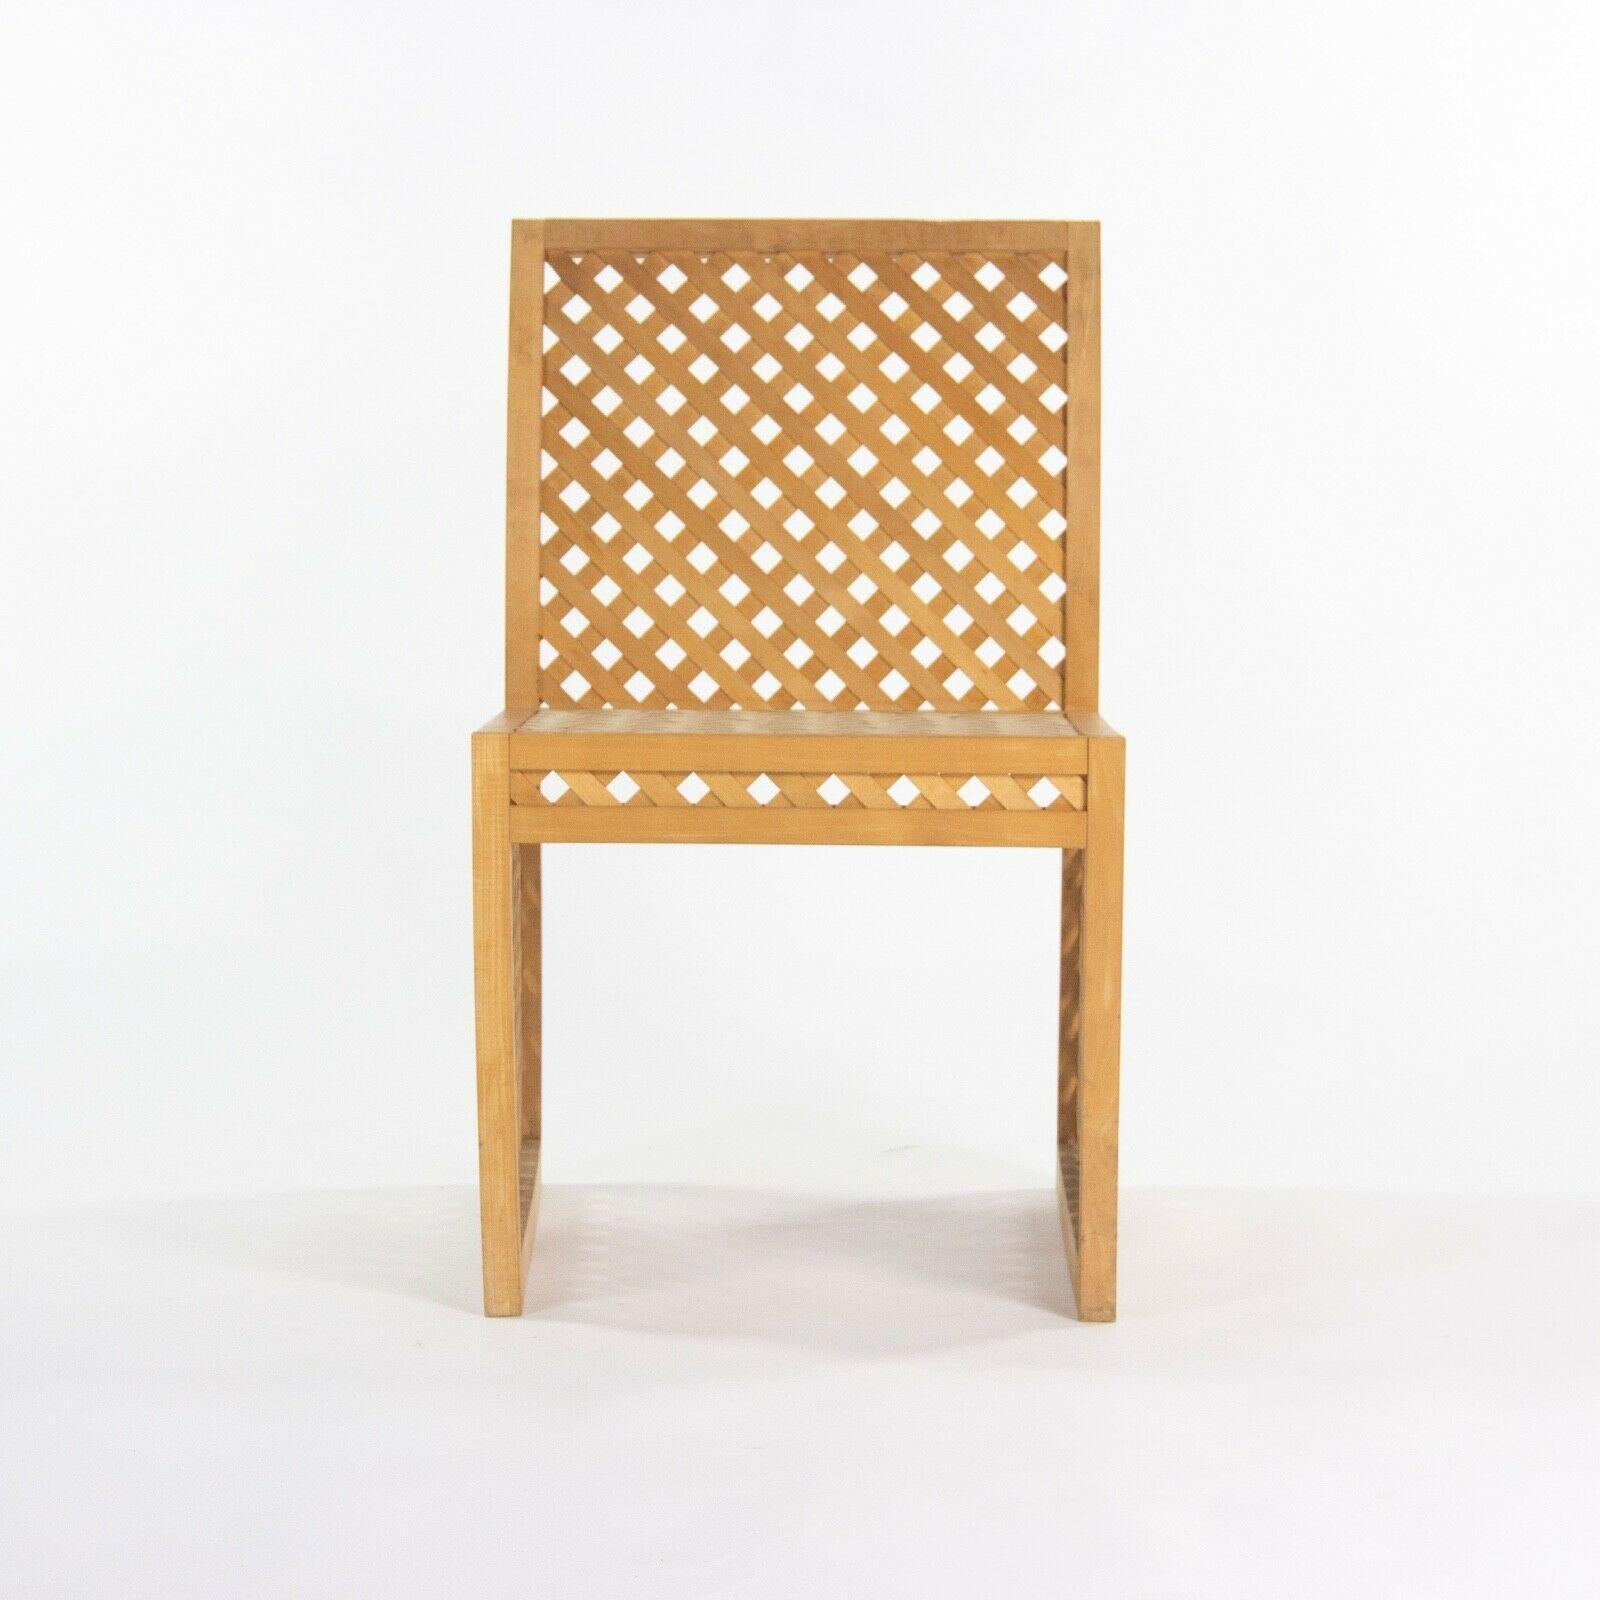 Listed for sale is a Richard Schultz Wooden Outdoor Collection dining chair prototype, dating to circa 1985. This is a marvelous and rare example. The frame is in very good shape with some light wear. The chair is constructed from woven wood strips